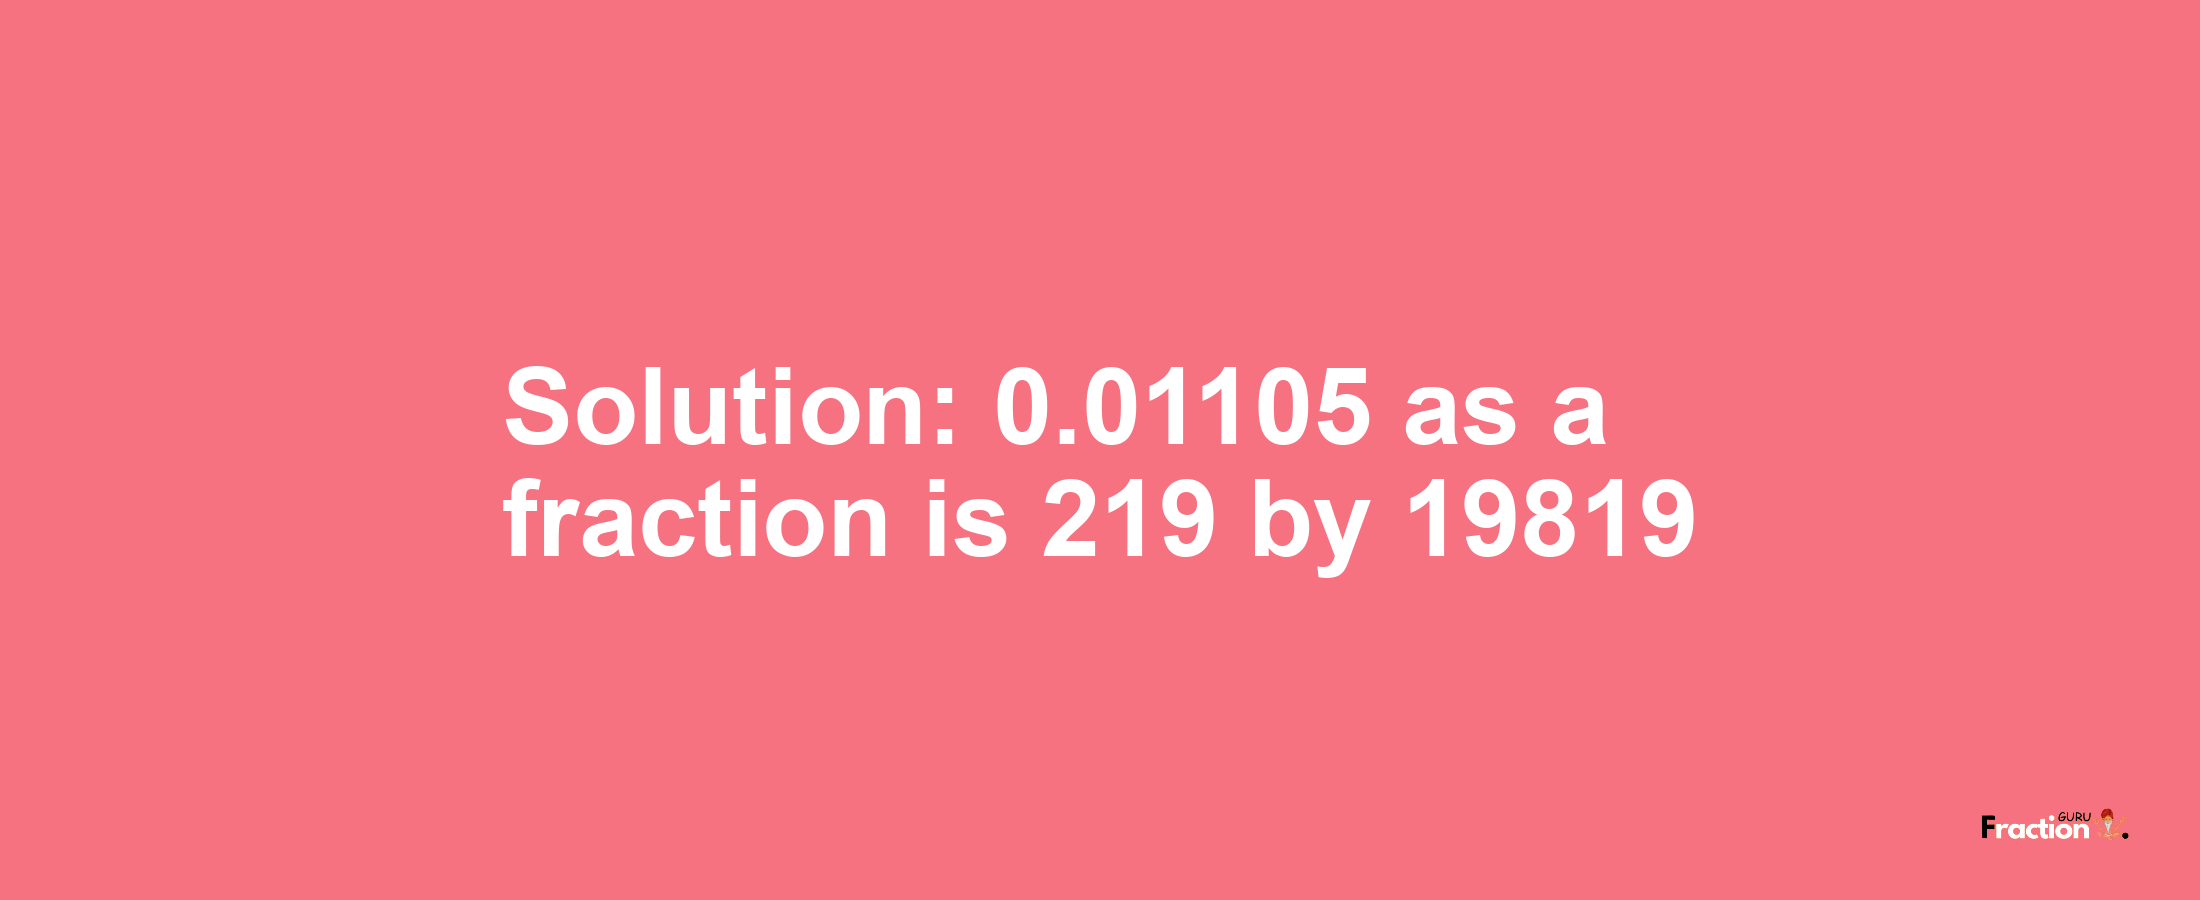 Solution:0.01105 as a fraction is 219/19819